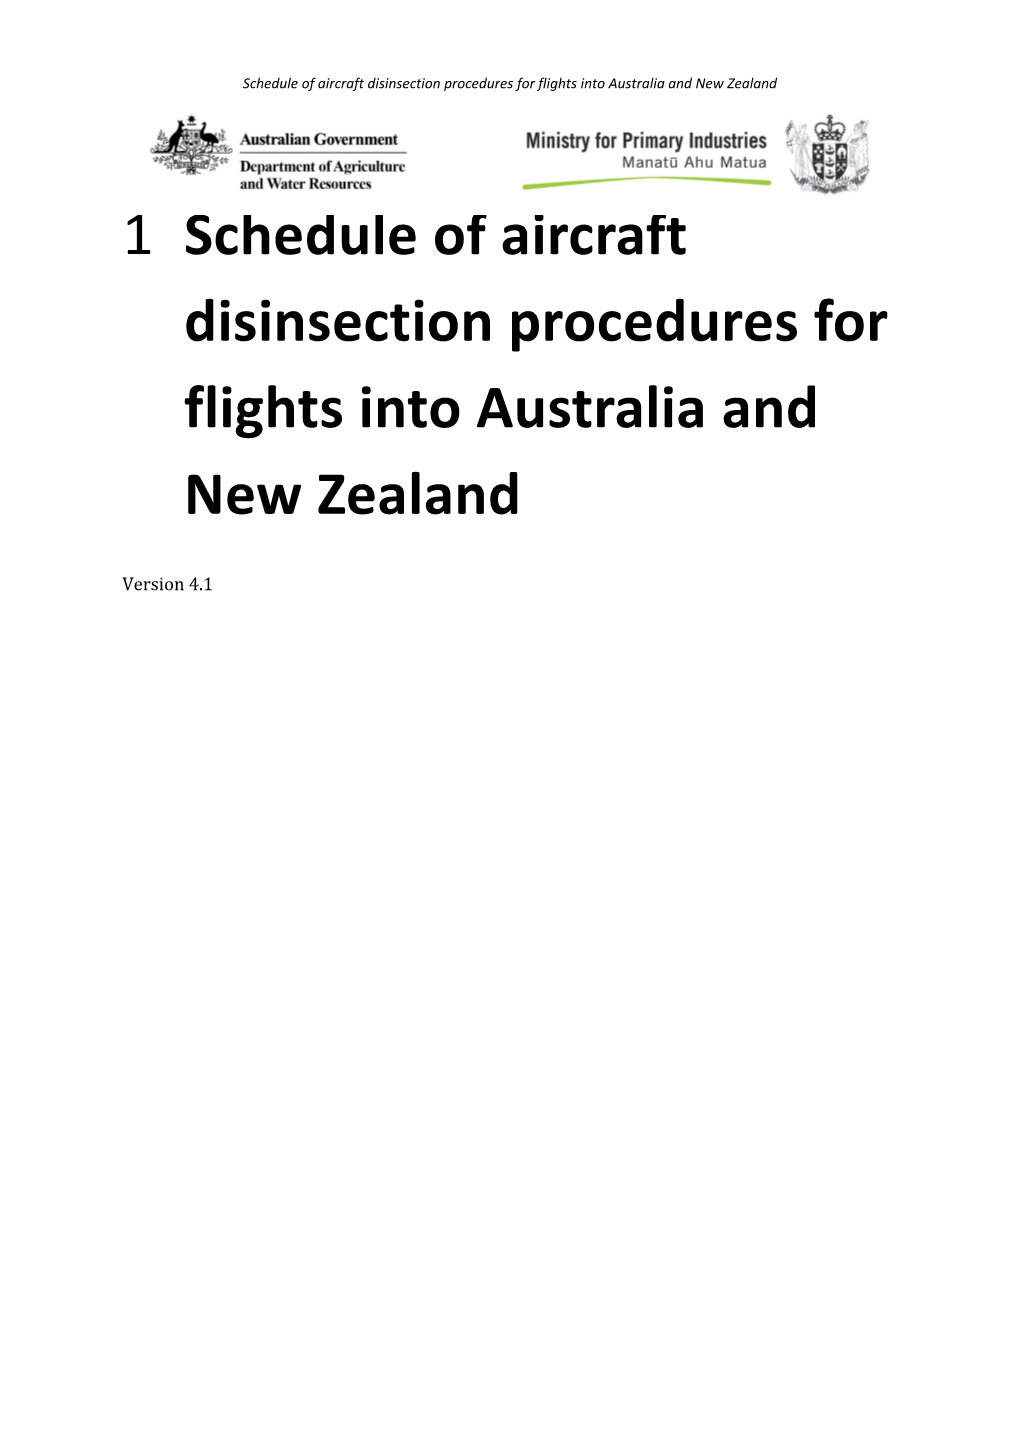 Schedule of Aircraft Disinsection Procedures for Flights Into Australia and New Zealand